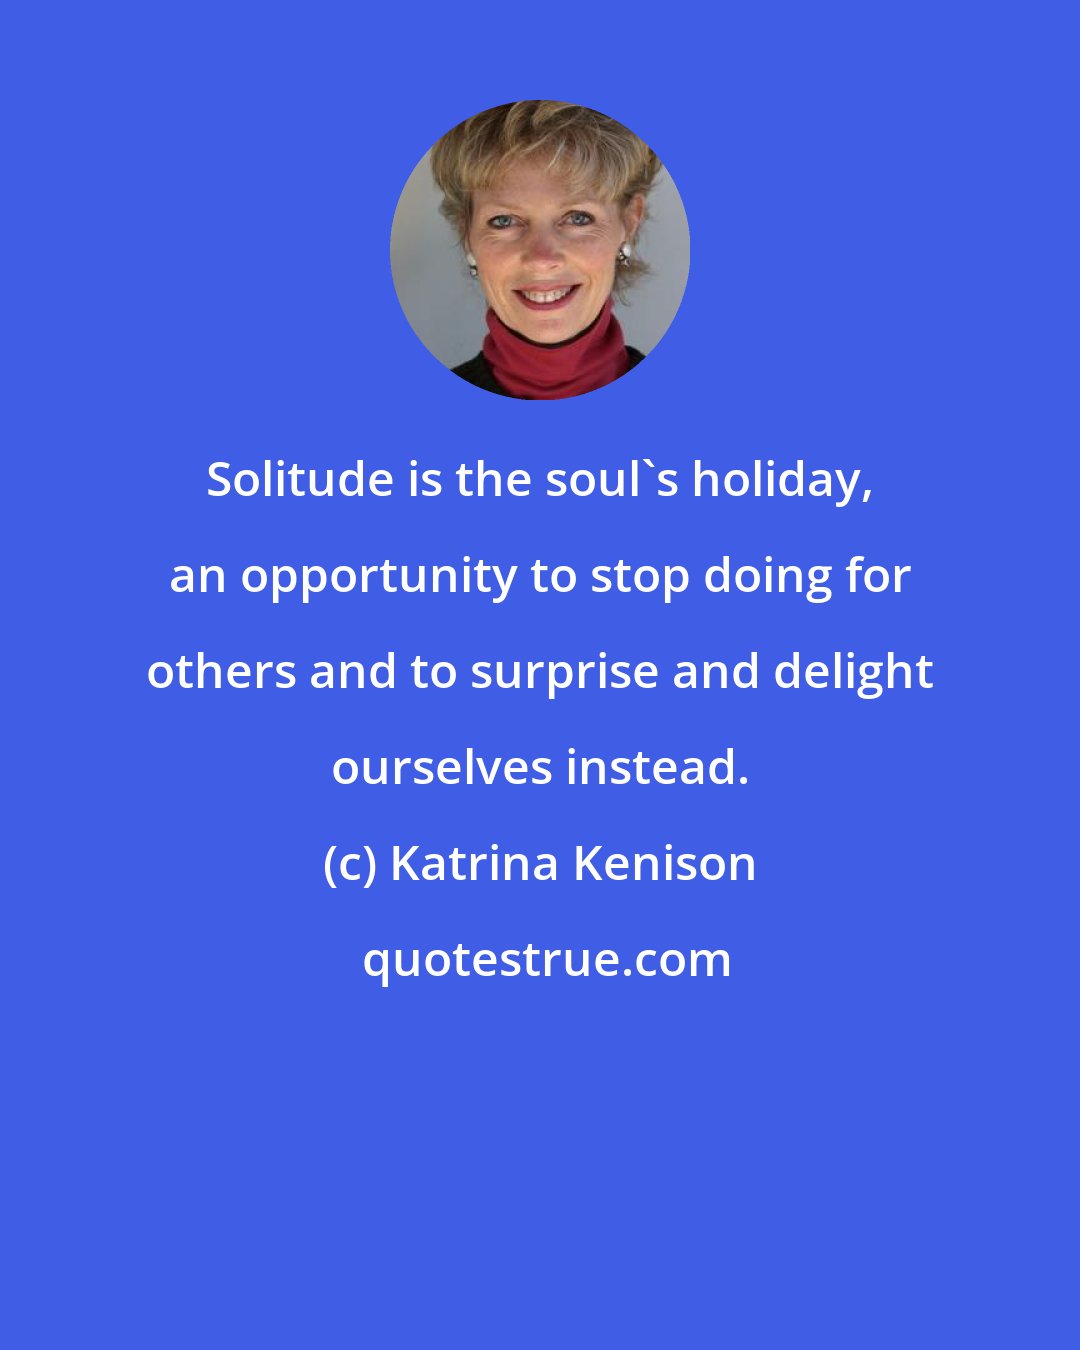 Katrina Kenison: Solitude is the soul's holiday, an opportunity to stop doing for others and to surprise and delight ourselves instead.